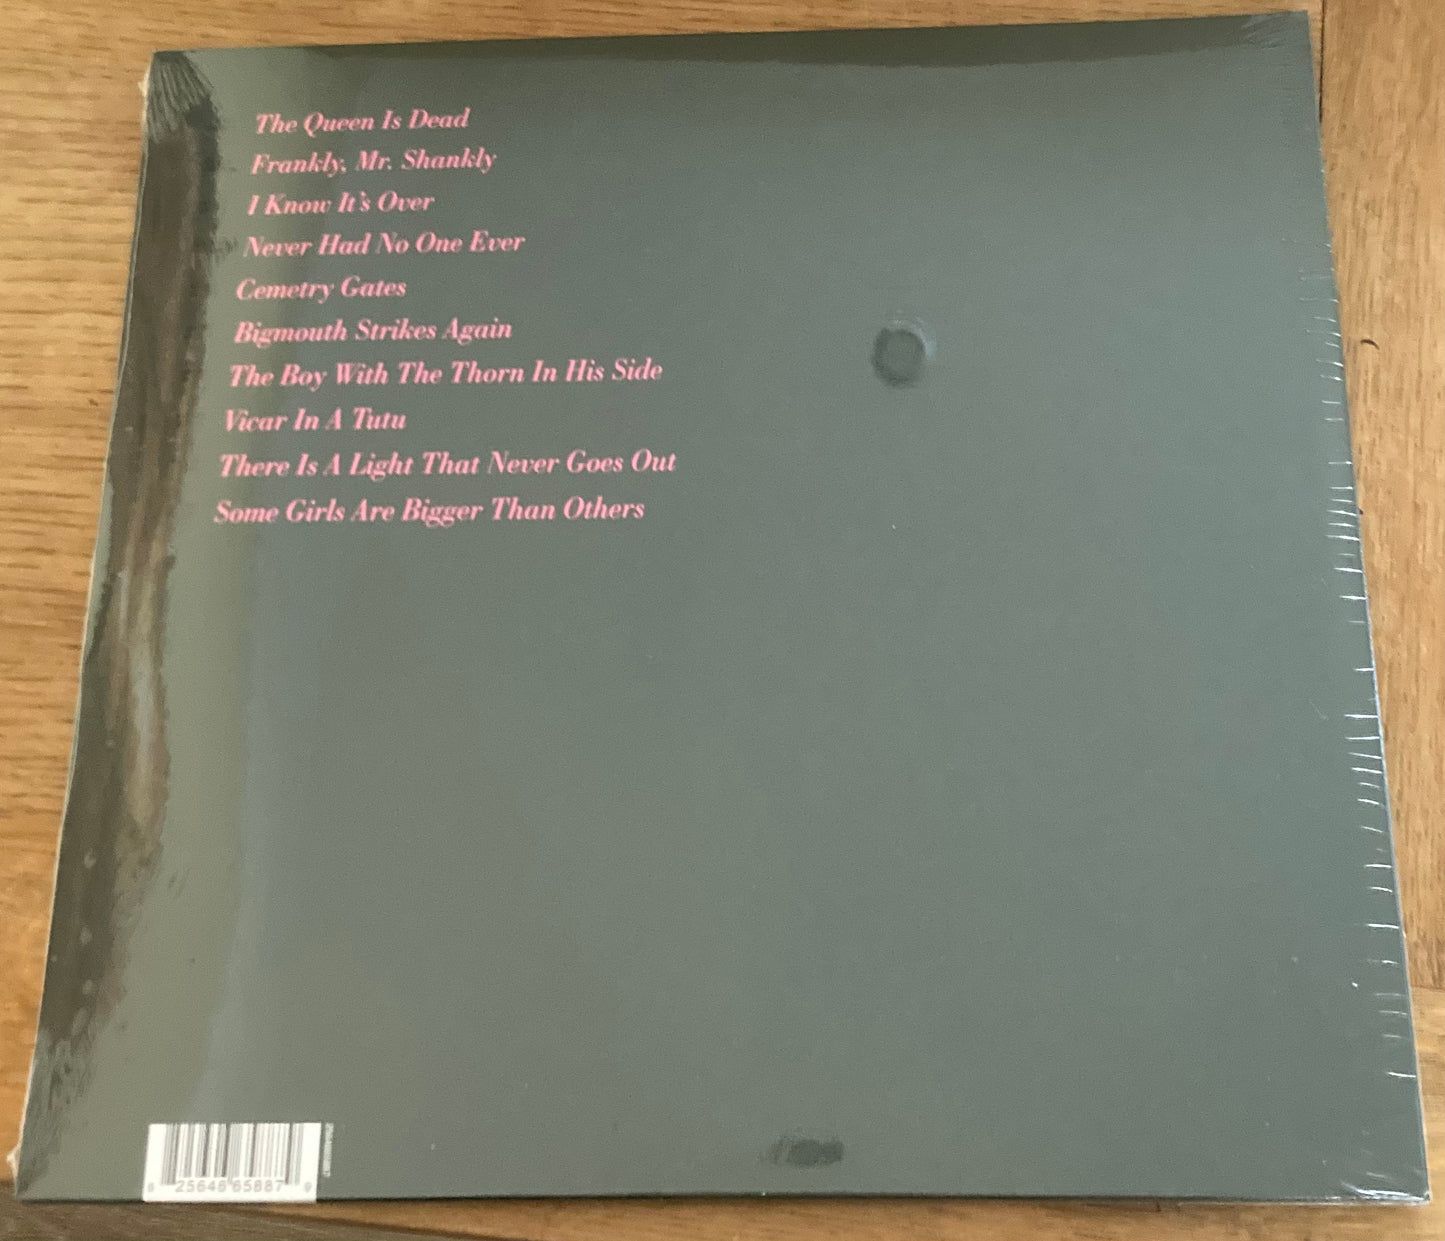 The back of 'The Smiths - The Queen is Dead' on vinyl